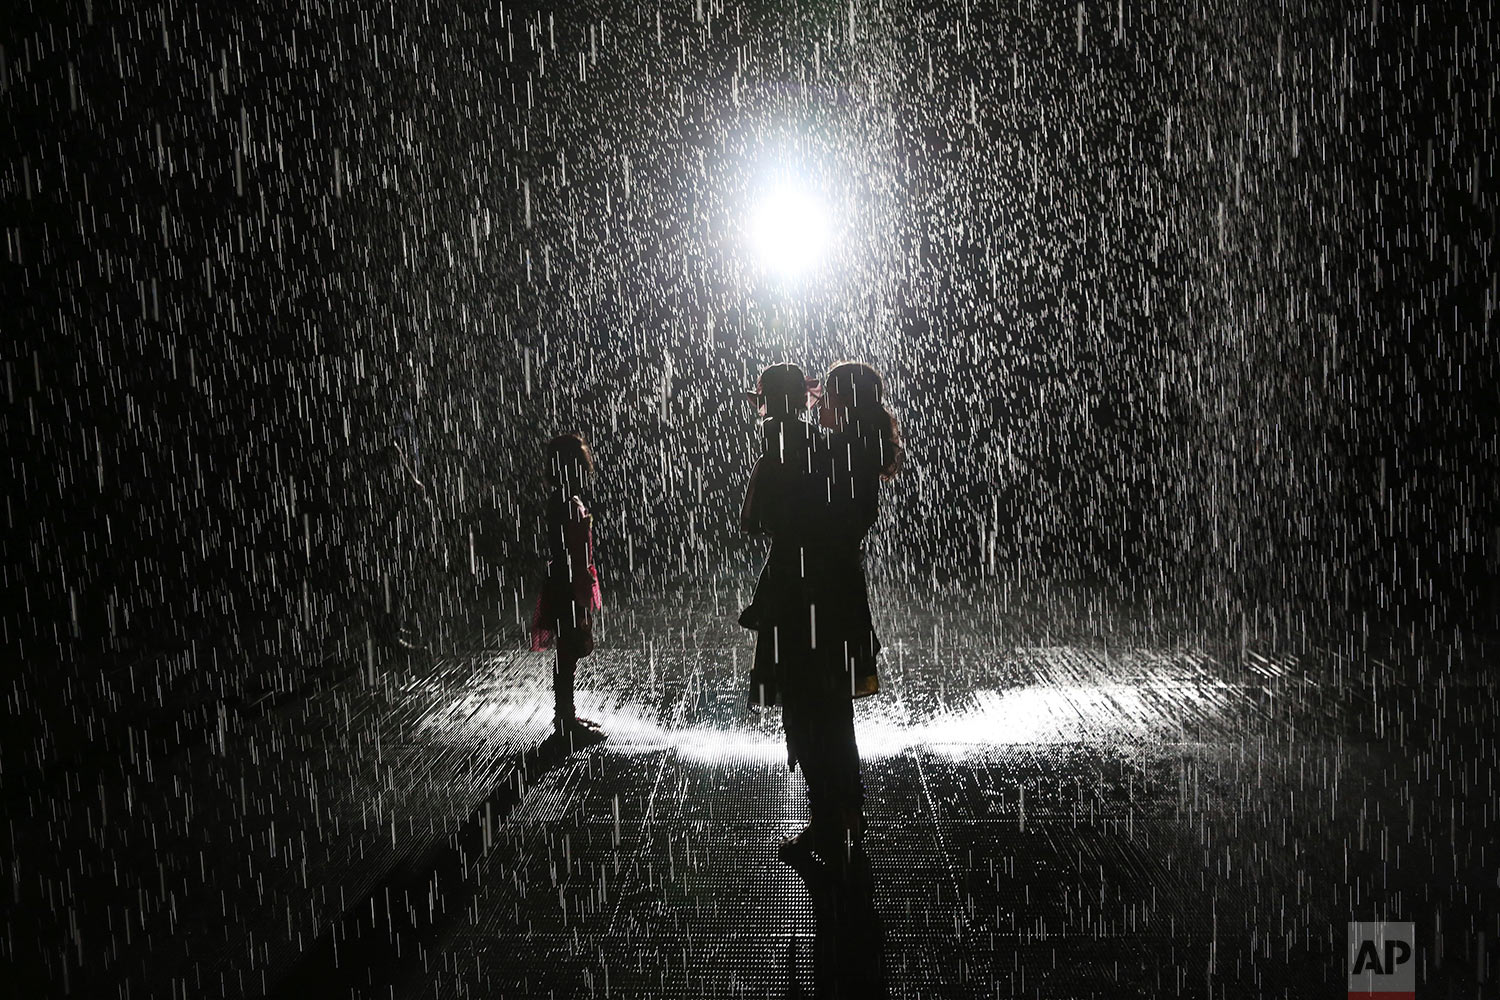  Visitors walk through the Sharjah Art Foundation's "Rain Room" installation in Sharjah, United Arab Emirates, Sunday, July 22, 2018. The art installation uses motion sensors to allow visitors to walk through it without getting wet as 2,500 liters of